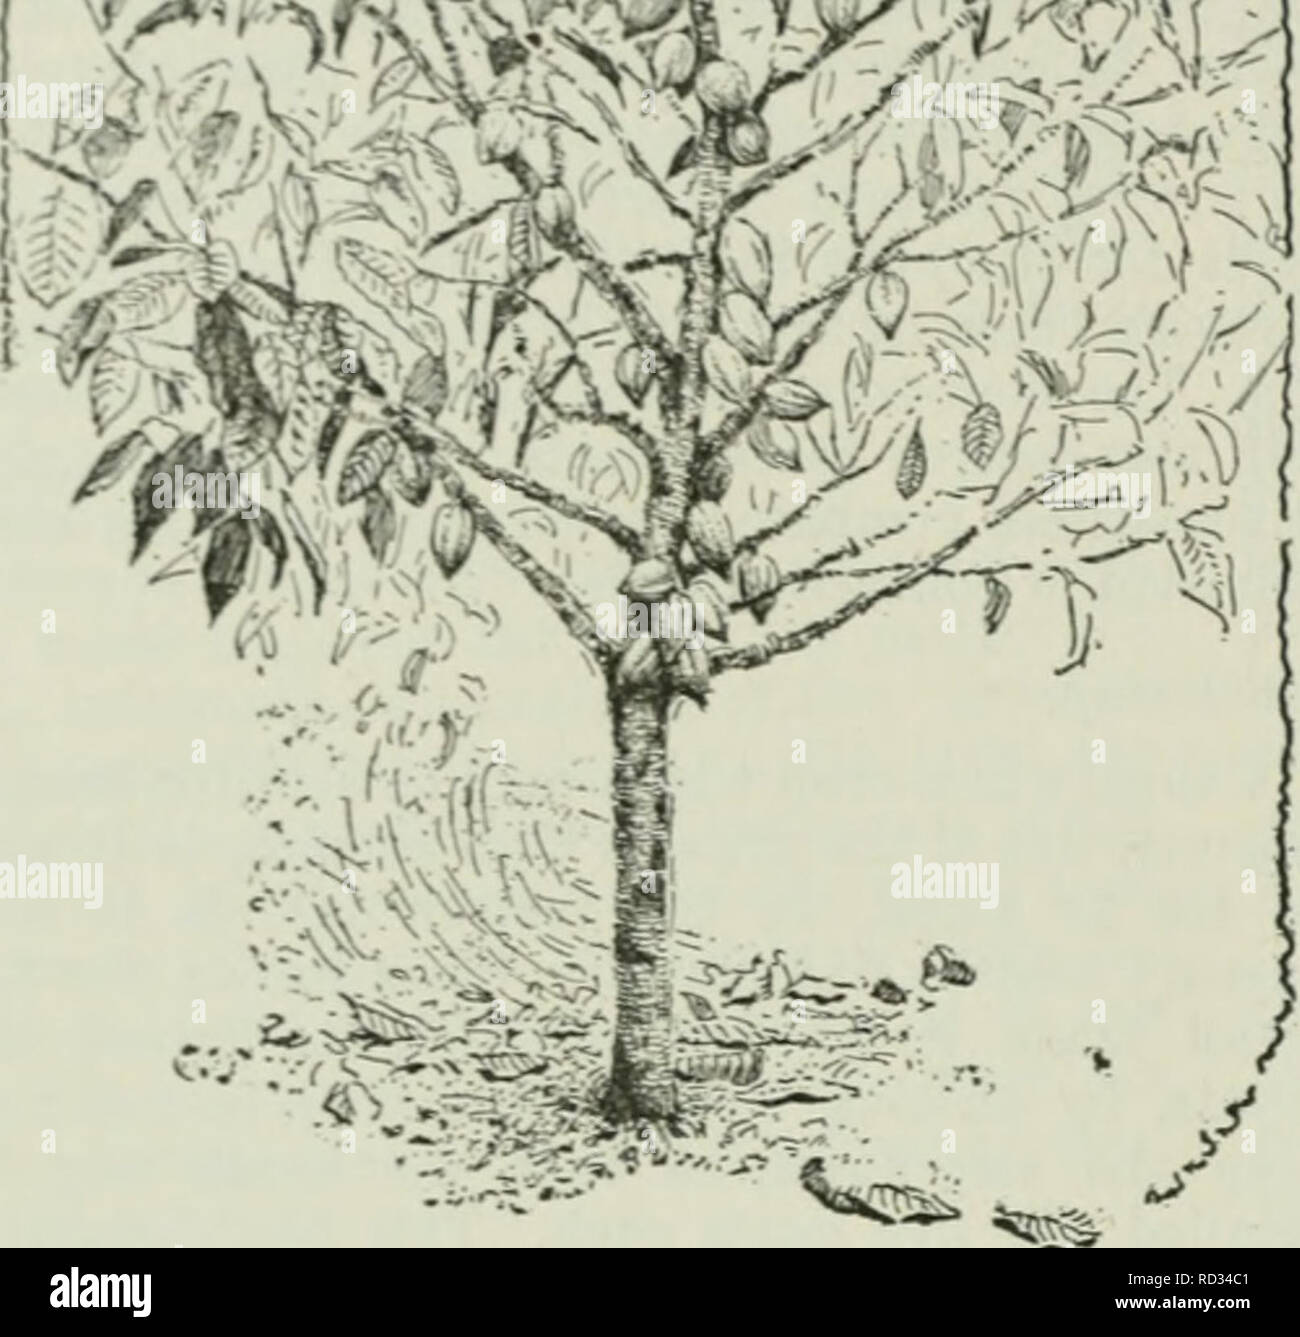 . Cyclopedia of farm crops : a popular survey of crops and crop-making methods in the United States and Canada. Agriculture -- Canada; Agriculture -- United States; Farm produce -- Canada; Farm produce -- United States. 224 CACAO CACAO. Fig. 318. Cacao tree of the Criollo&quot; type, showing manlier of bearing fruit. 3ACA0. Theobroma spp. SterciUiacece. Figs. 318- 320; Fig. 119, Vol. I. By G. X. Collins. Chocolate and cocoa, the manufactured forms of cacao, are the product of the seeds of several spe- cies of Theobroma, a strictly American genus. Theobroma Cacao is the species producing the gr Stock Photo